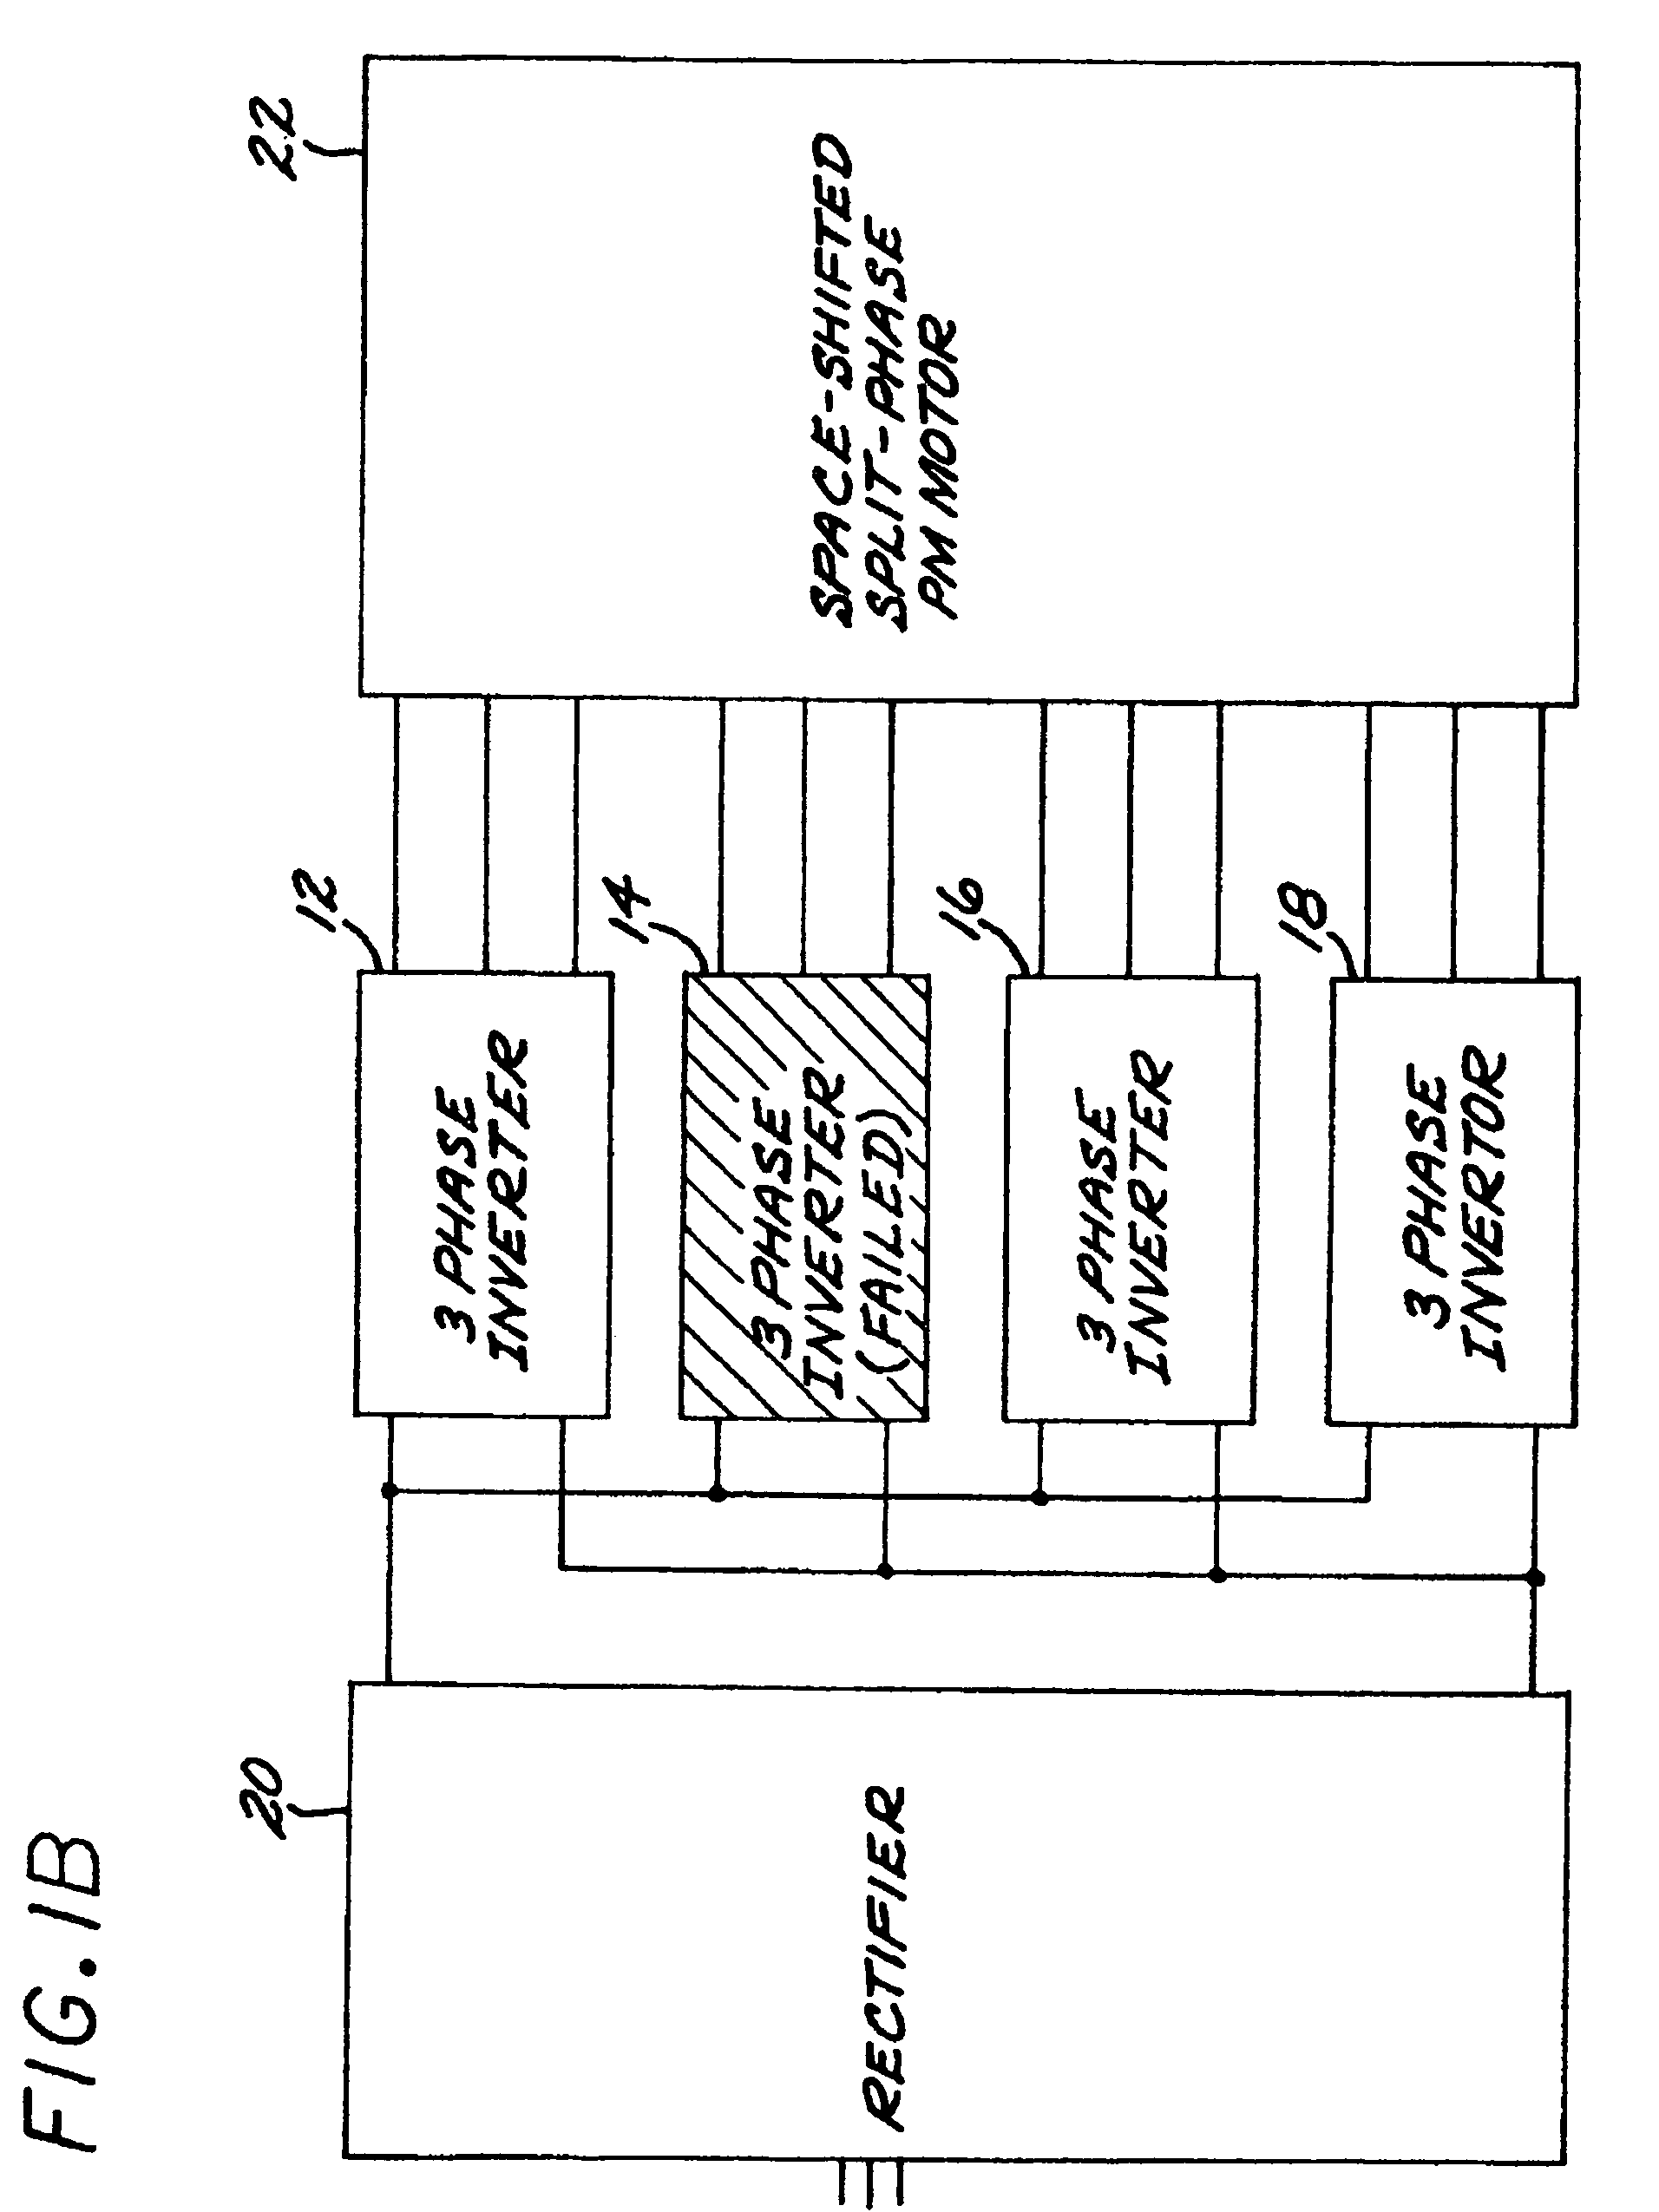 Electric drive system with redundancy